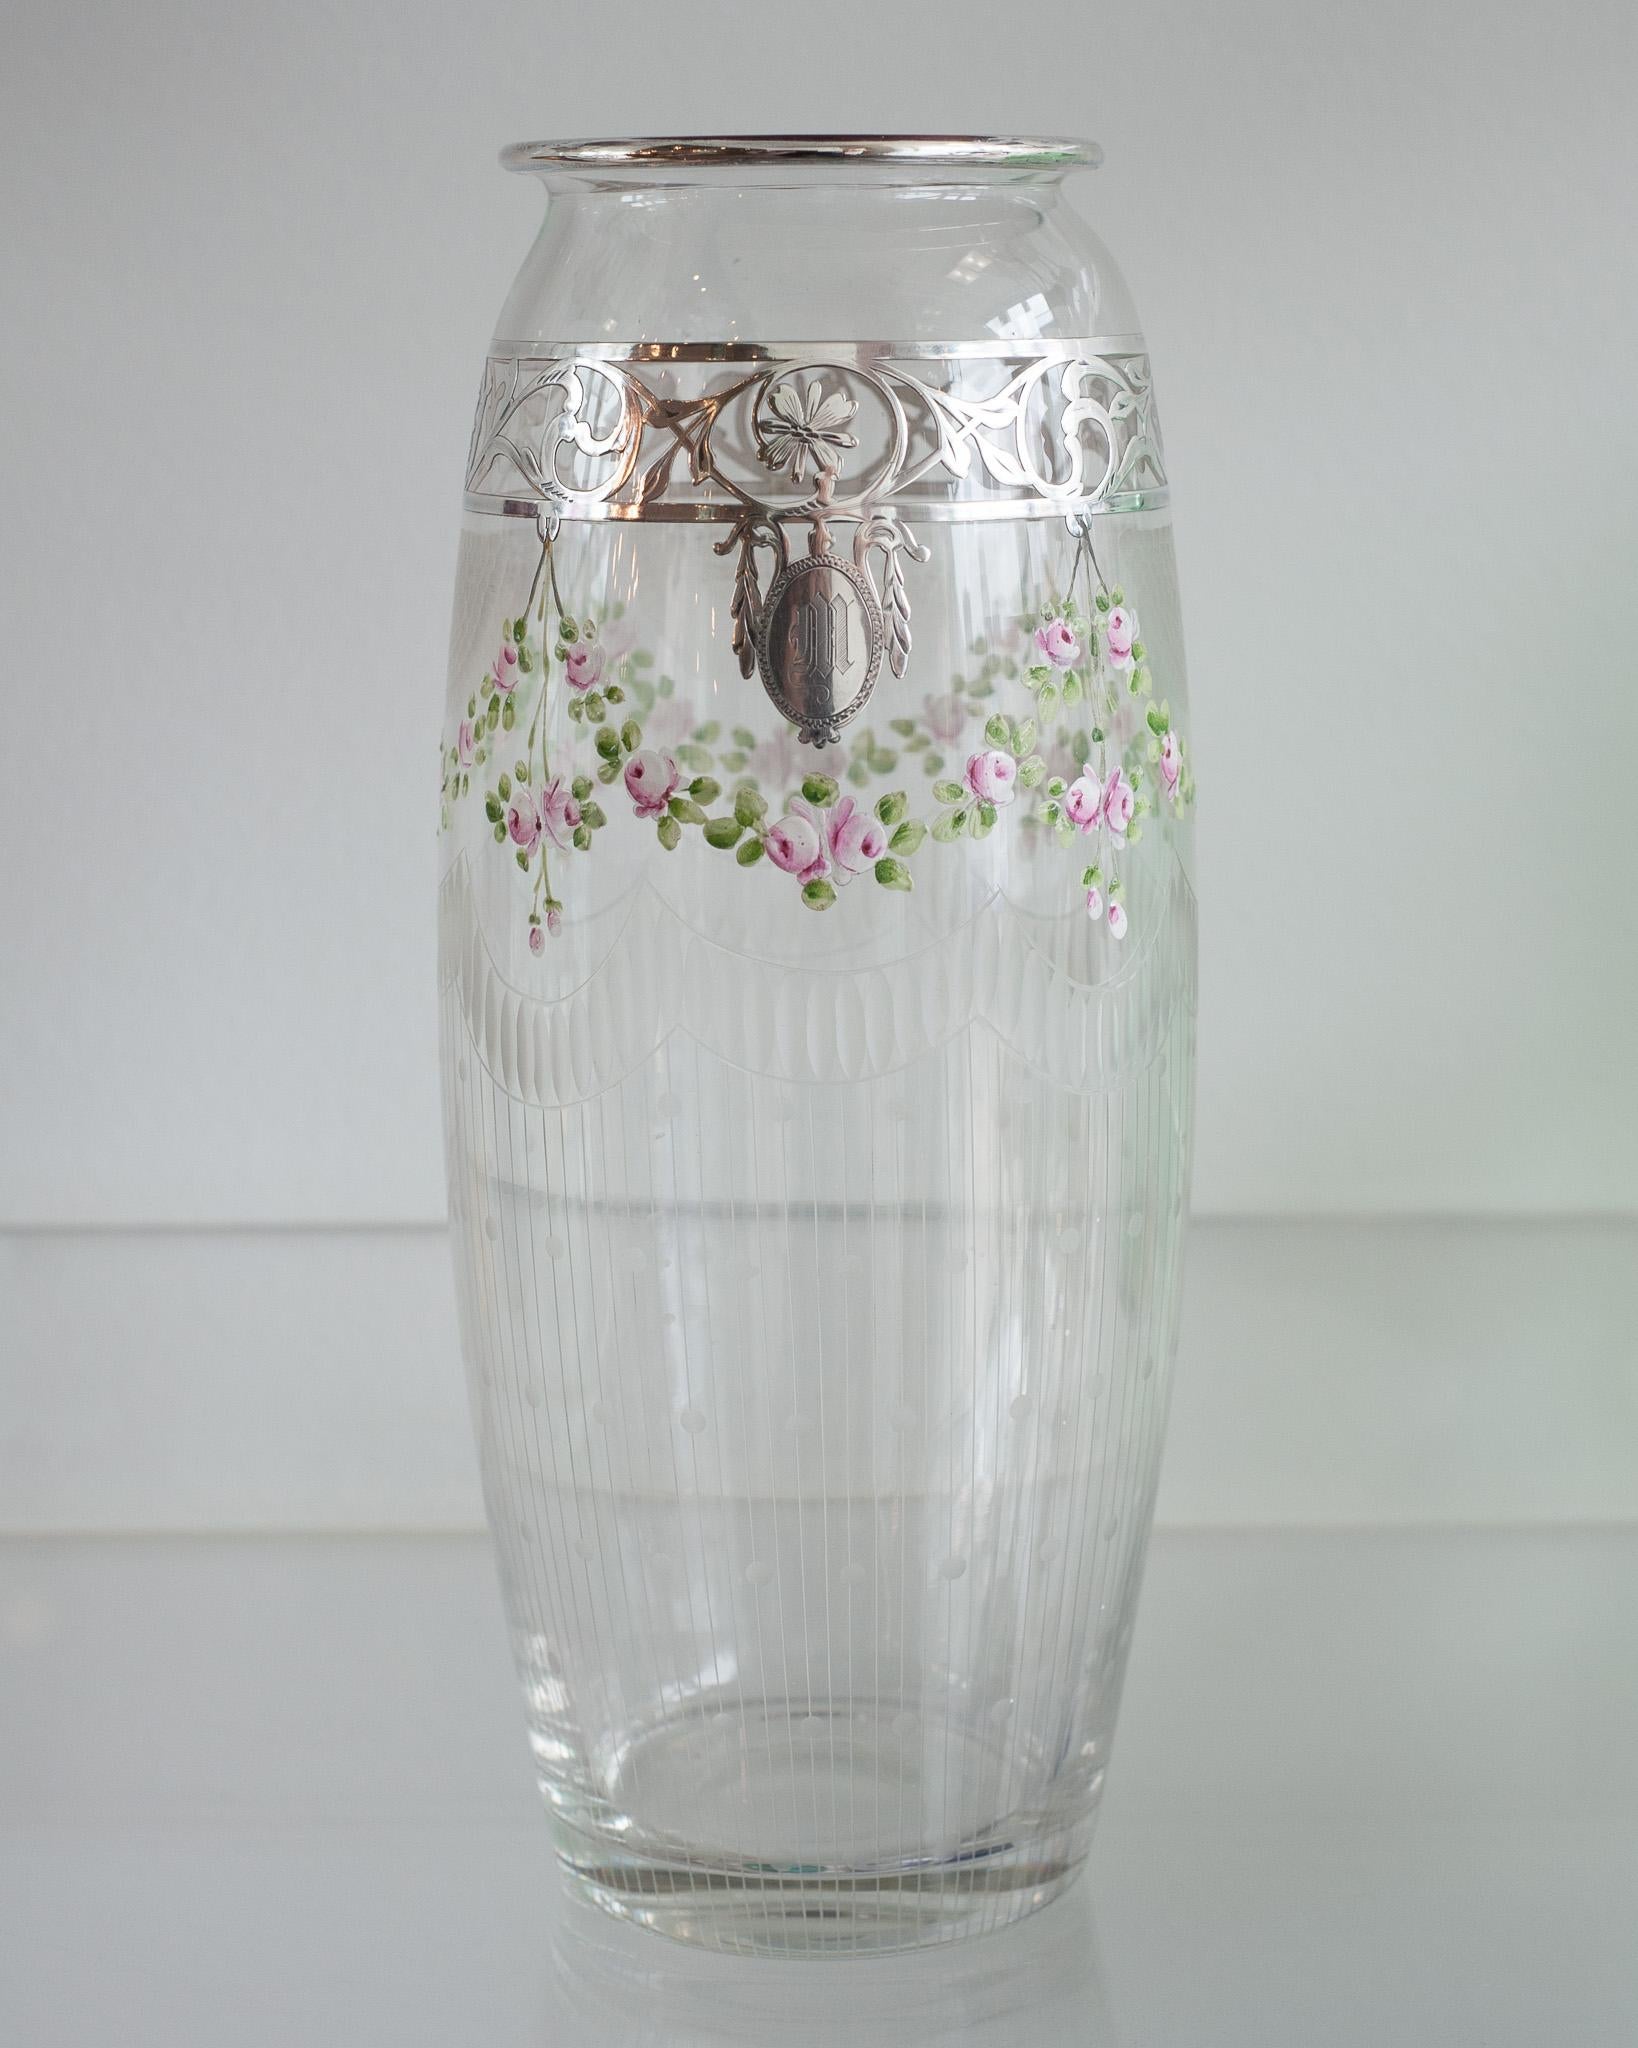 A beautiful antique Bohemian glass vase with enamel and sterling silver detail, ornately etched and hand painted with a floral motif. Wreaths of flowers in super fine detail are supporting a delicate silver trim. A perfect size for everyday use.